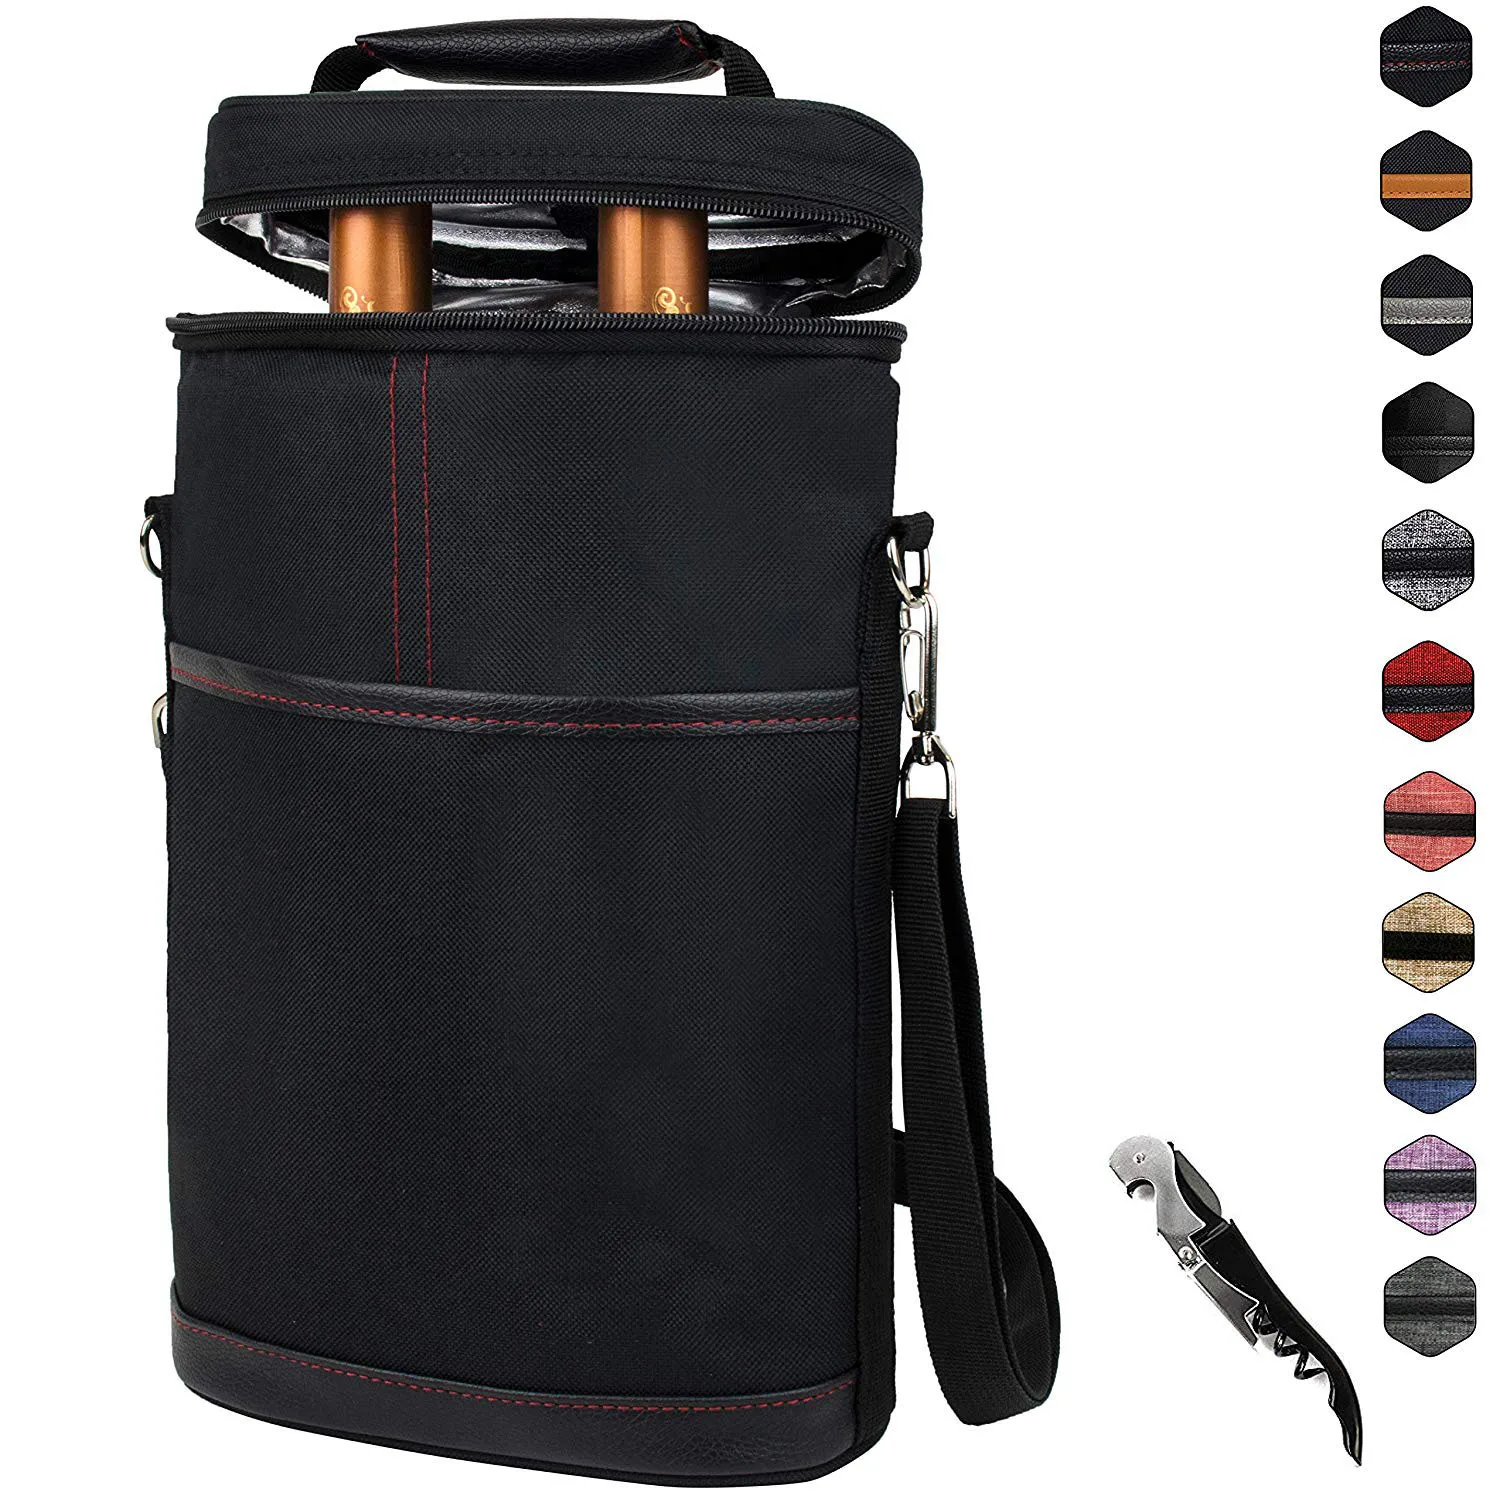 2 bottle insulated wine tote bag Perfect Wine Lovers Gift Great for Picnics and Outdoor Entertaining Wine Carrier Travel Padded Cooler Bag with Shoulder Strap & Corkscrew Opener 